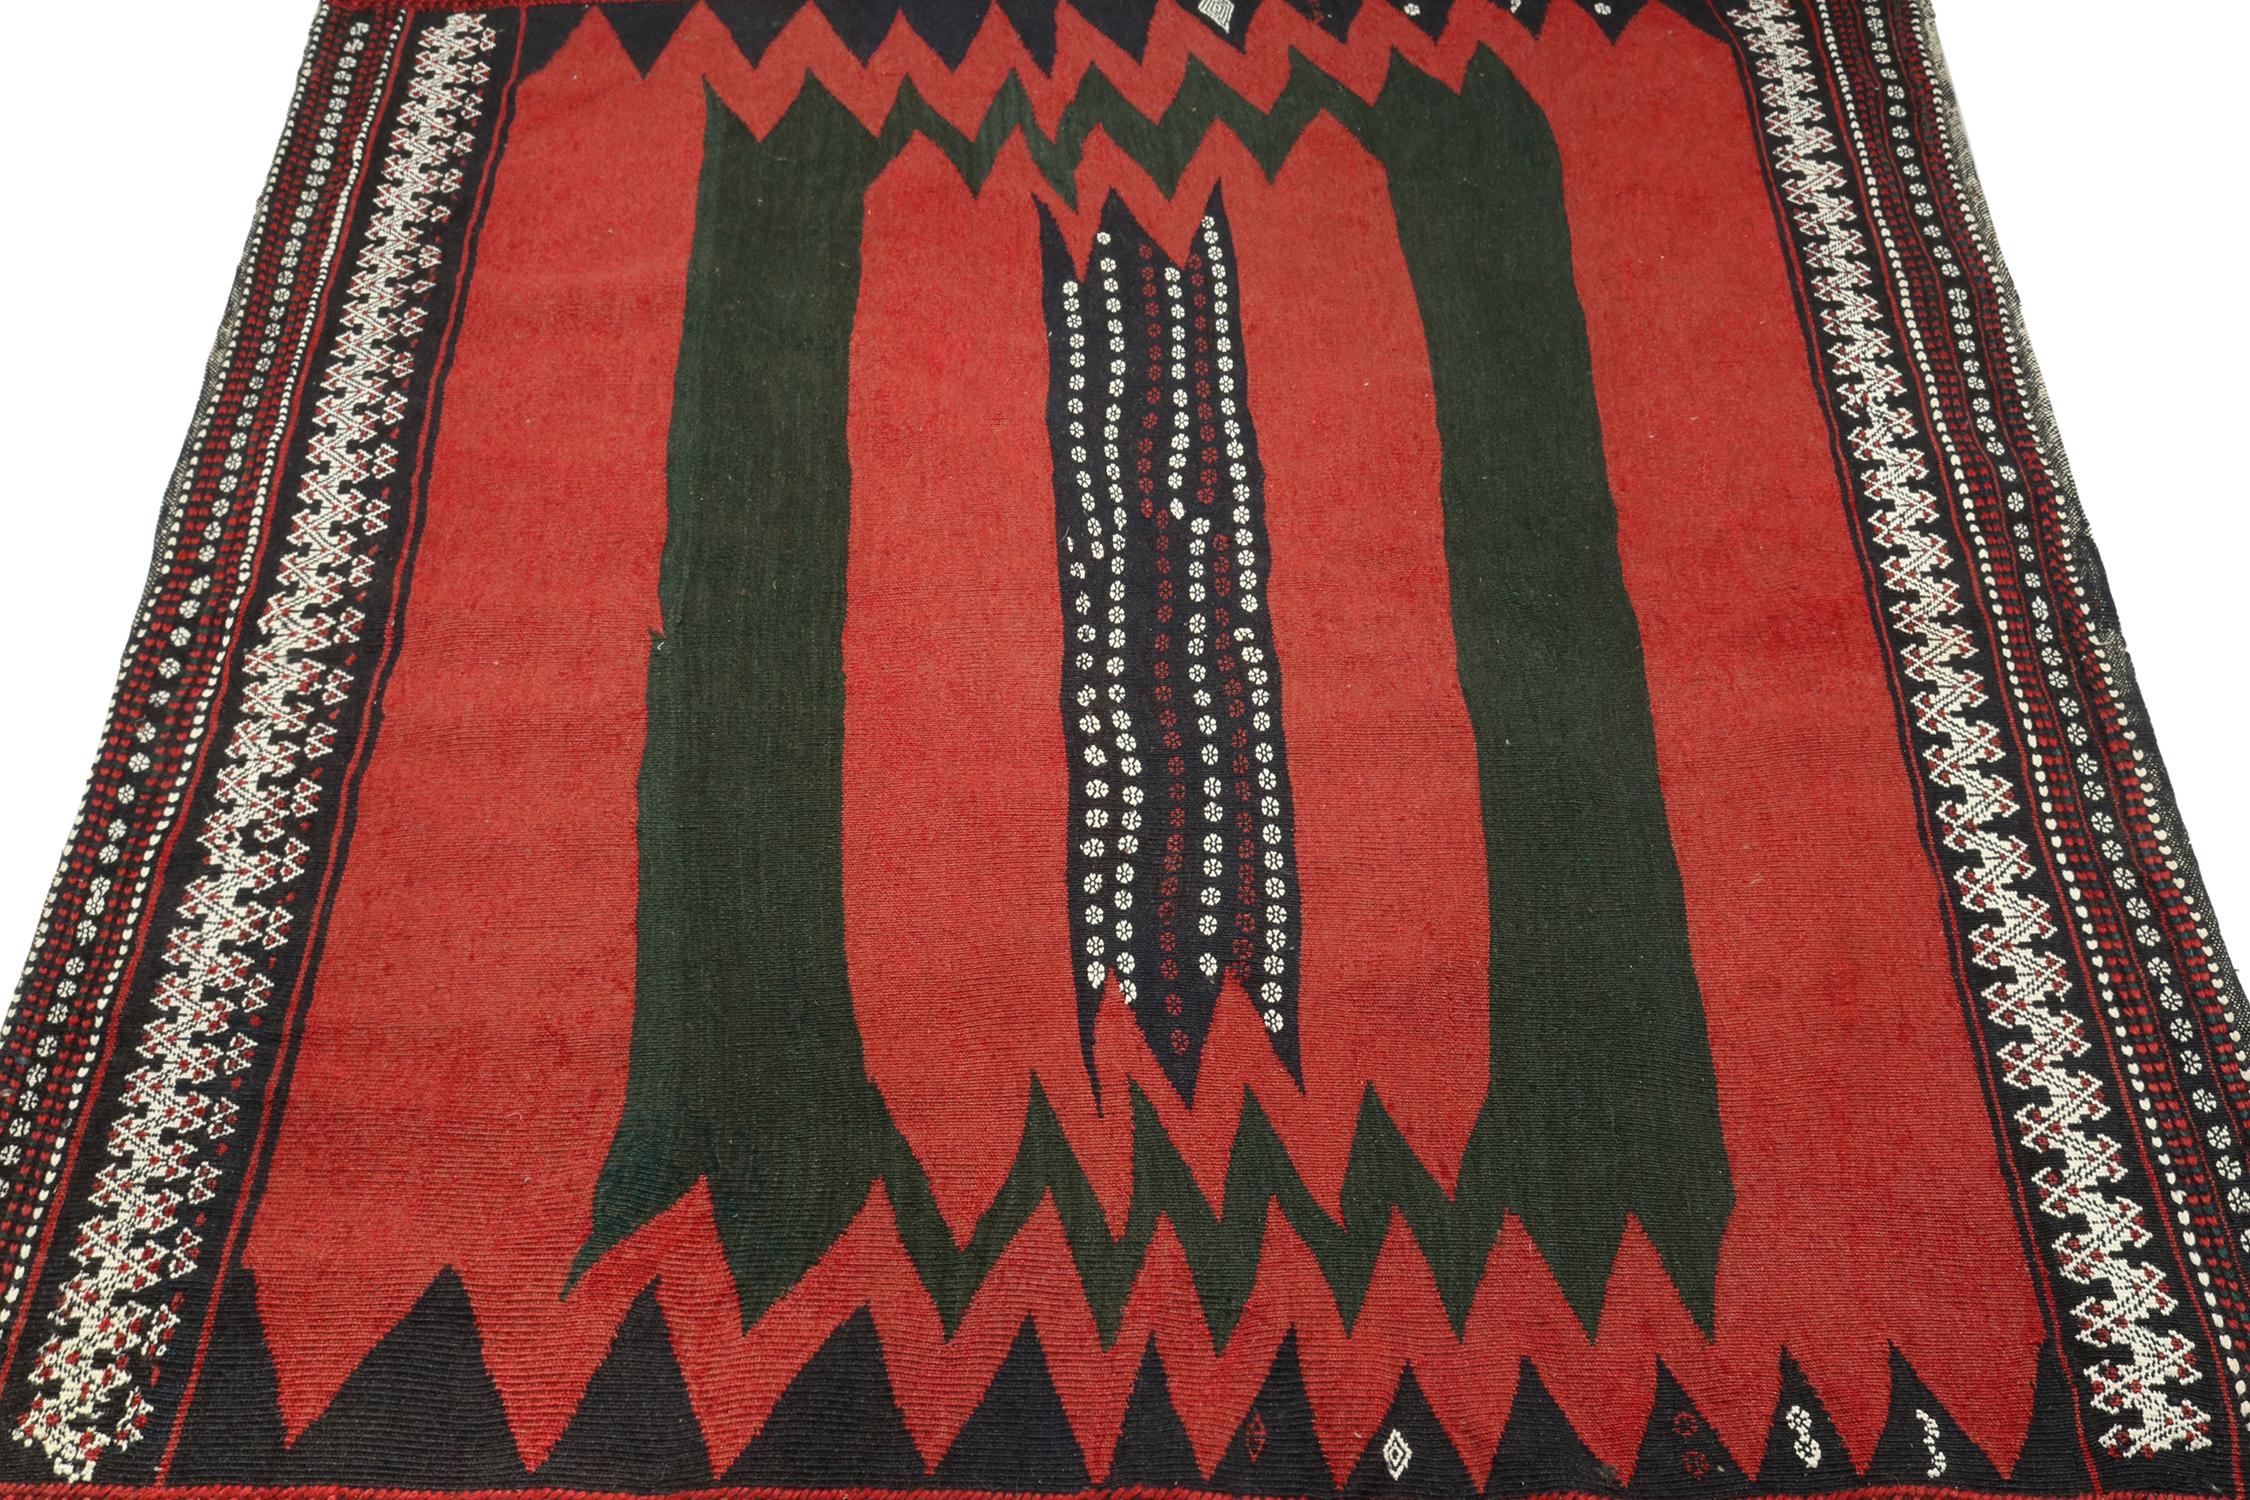 This vintage 4x5 Persian kilim is a tribal Sofreh rug—handwoven in wool circa 1970-1980.

Further on the Design:

Sofreh Kilims like this piece are known for their minimalist patterns, vibrant colors and durable bodies. This particular flat weave